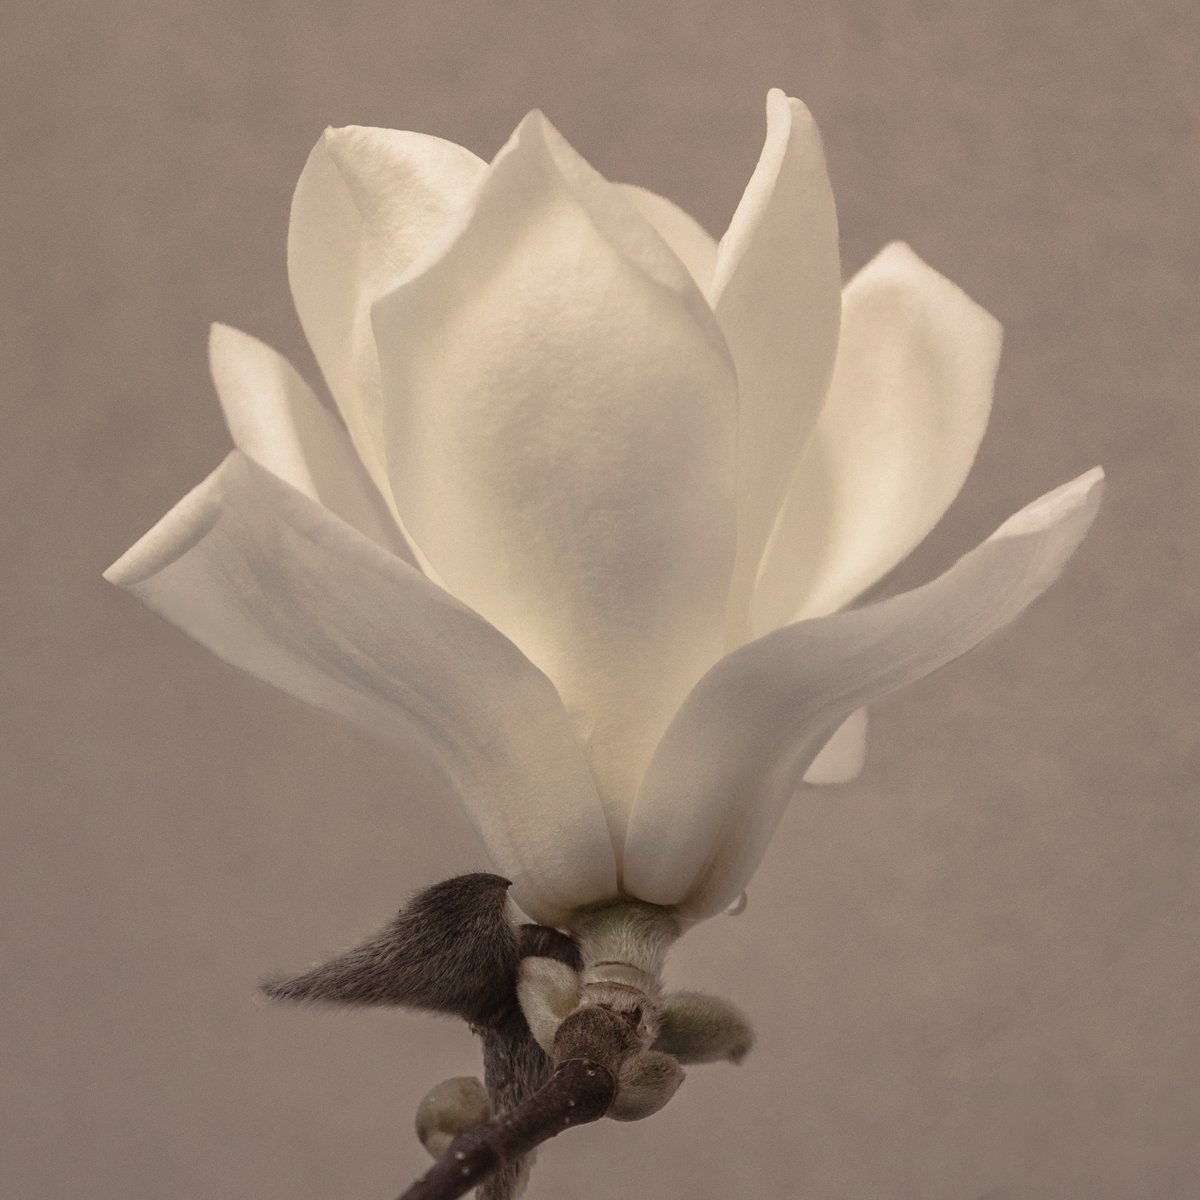 A perfect white #magnolia. A rare thing indeed. Back out with my camera after 7 long weeks recovering from yet more surgery on my mangled hand. Feels good 🙏 #sharemondays2024 #fsprintmonday #wexmondays #flowerphotography @GdnMediaGuild